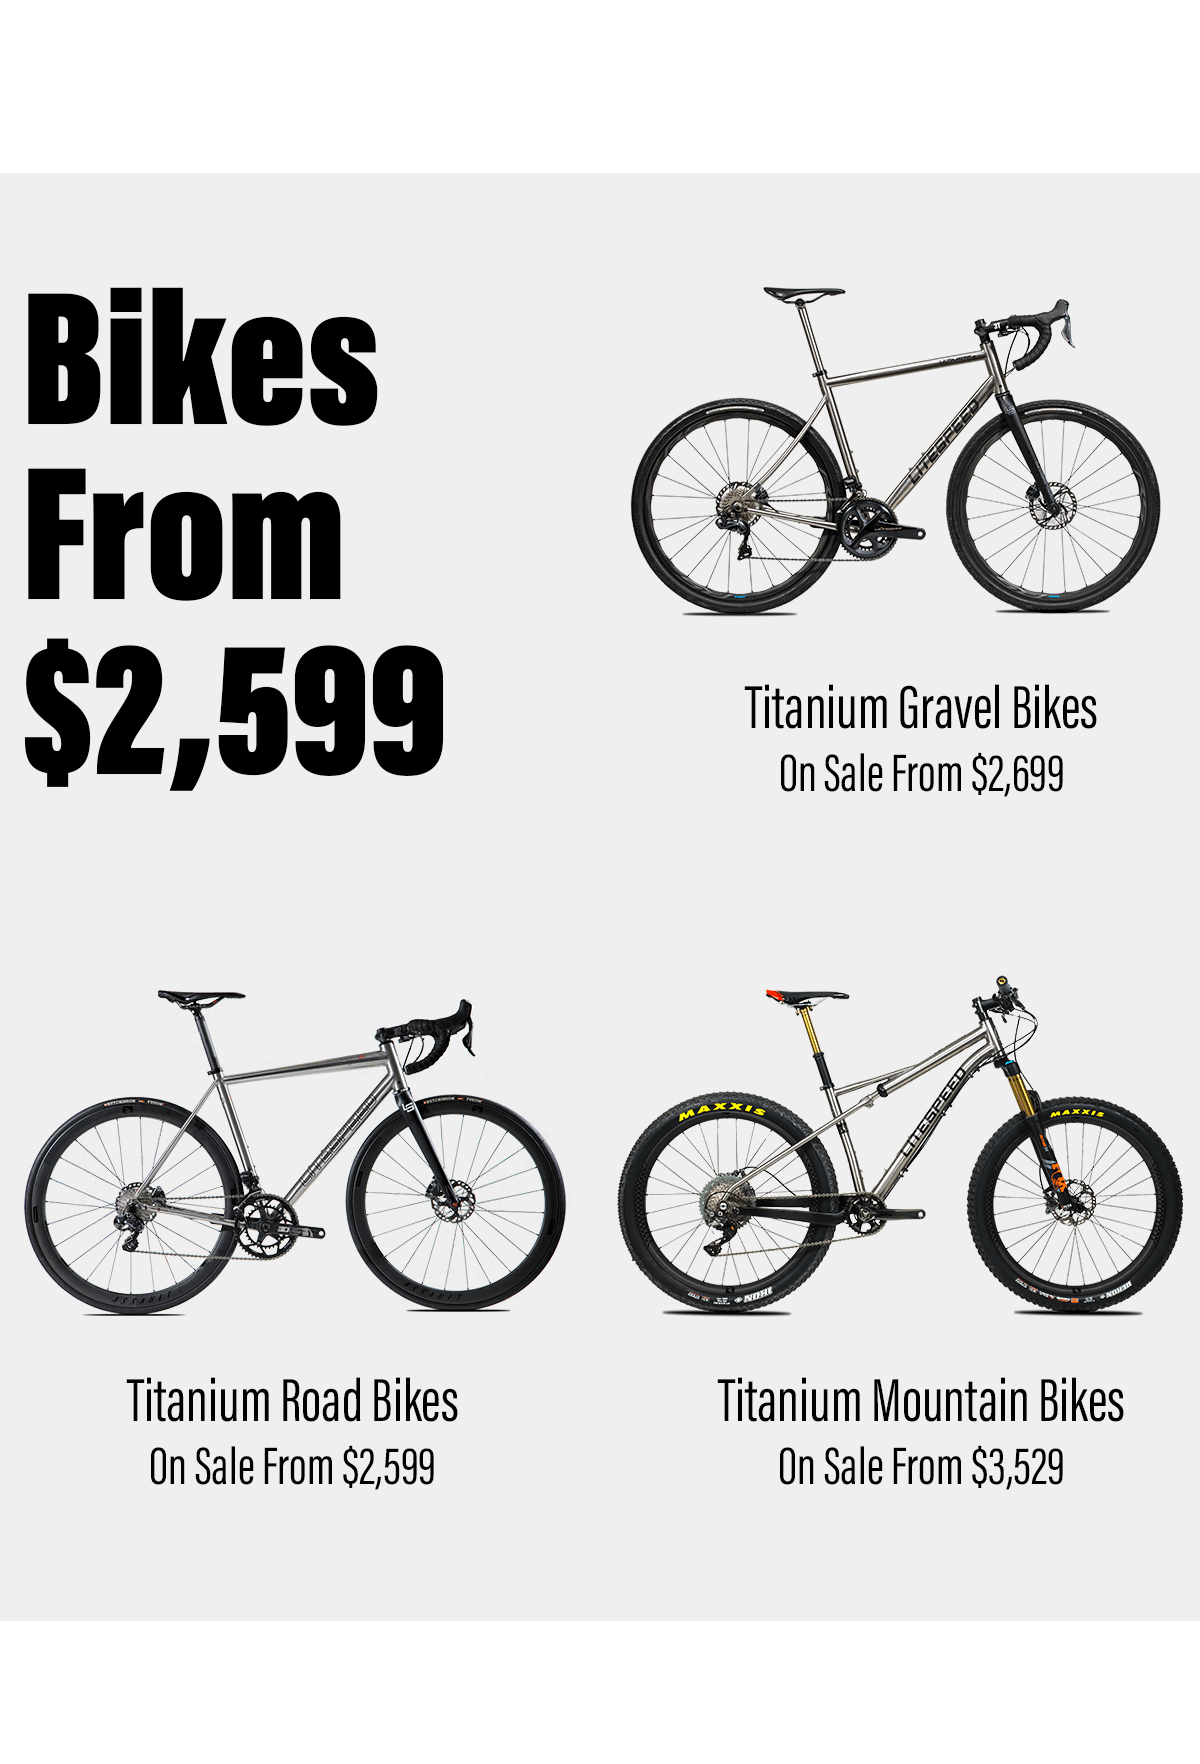 Bikes from $2,999 - shop the Litespeed Summer Sale now!